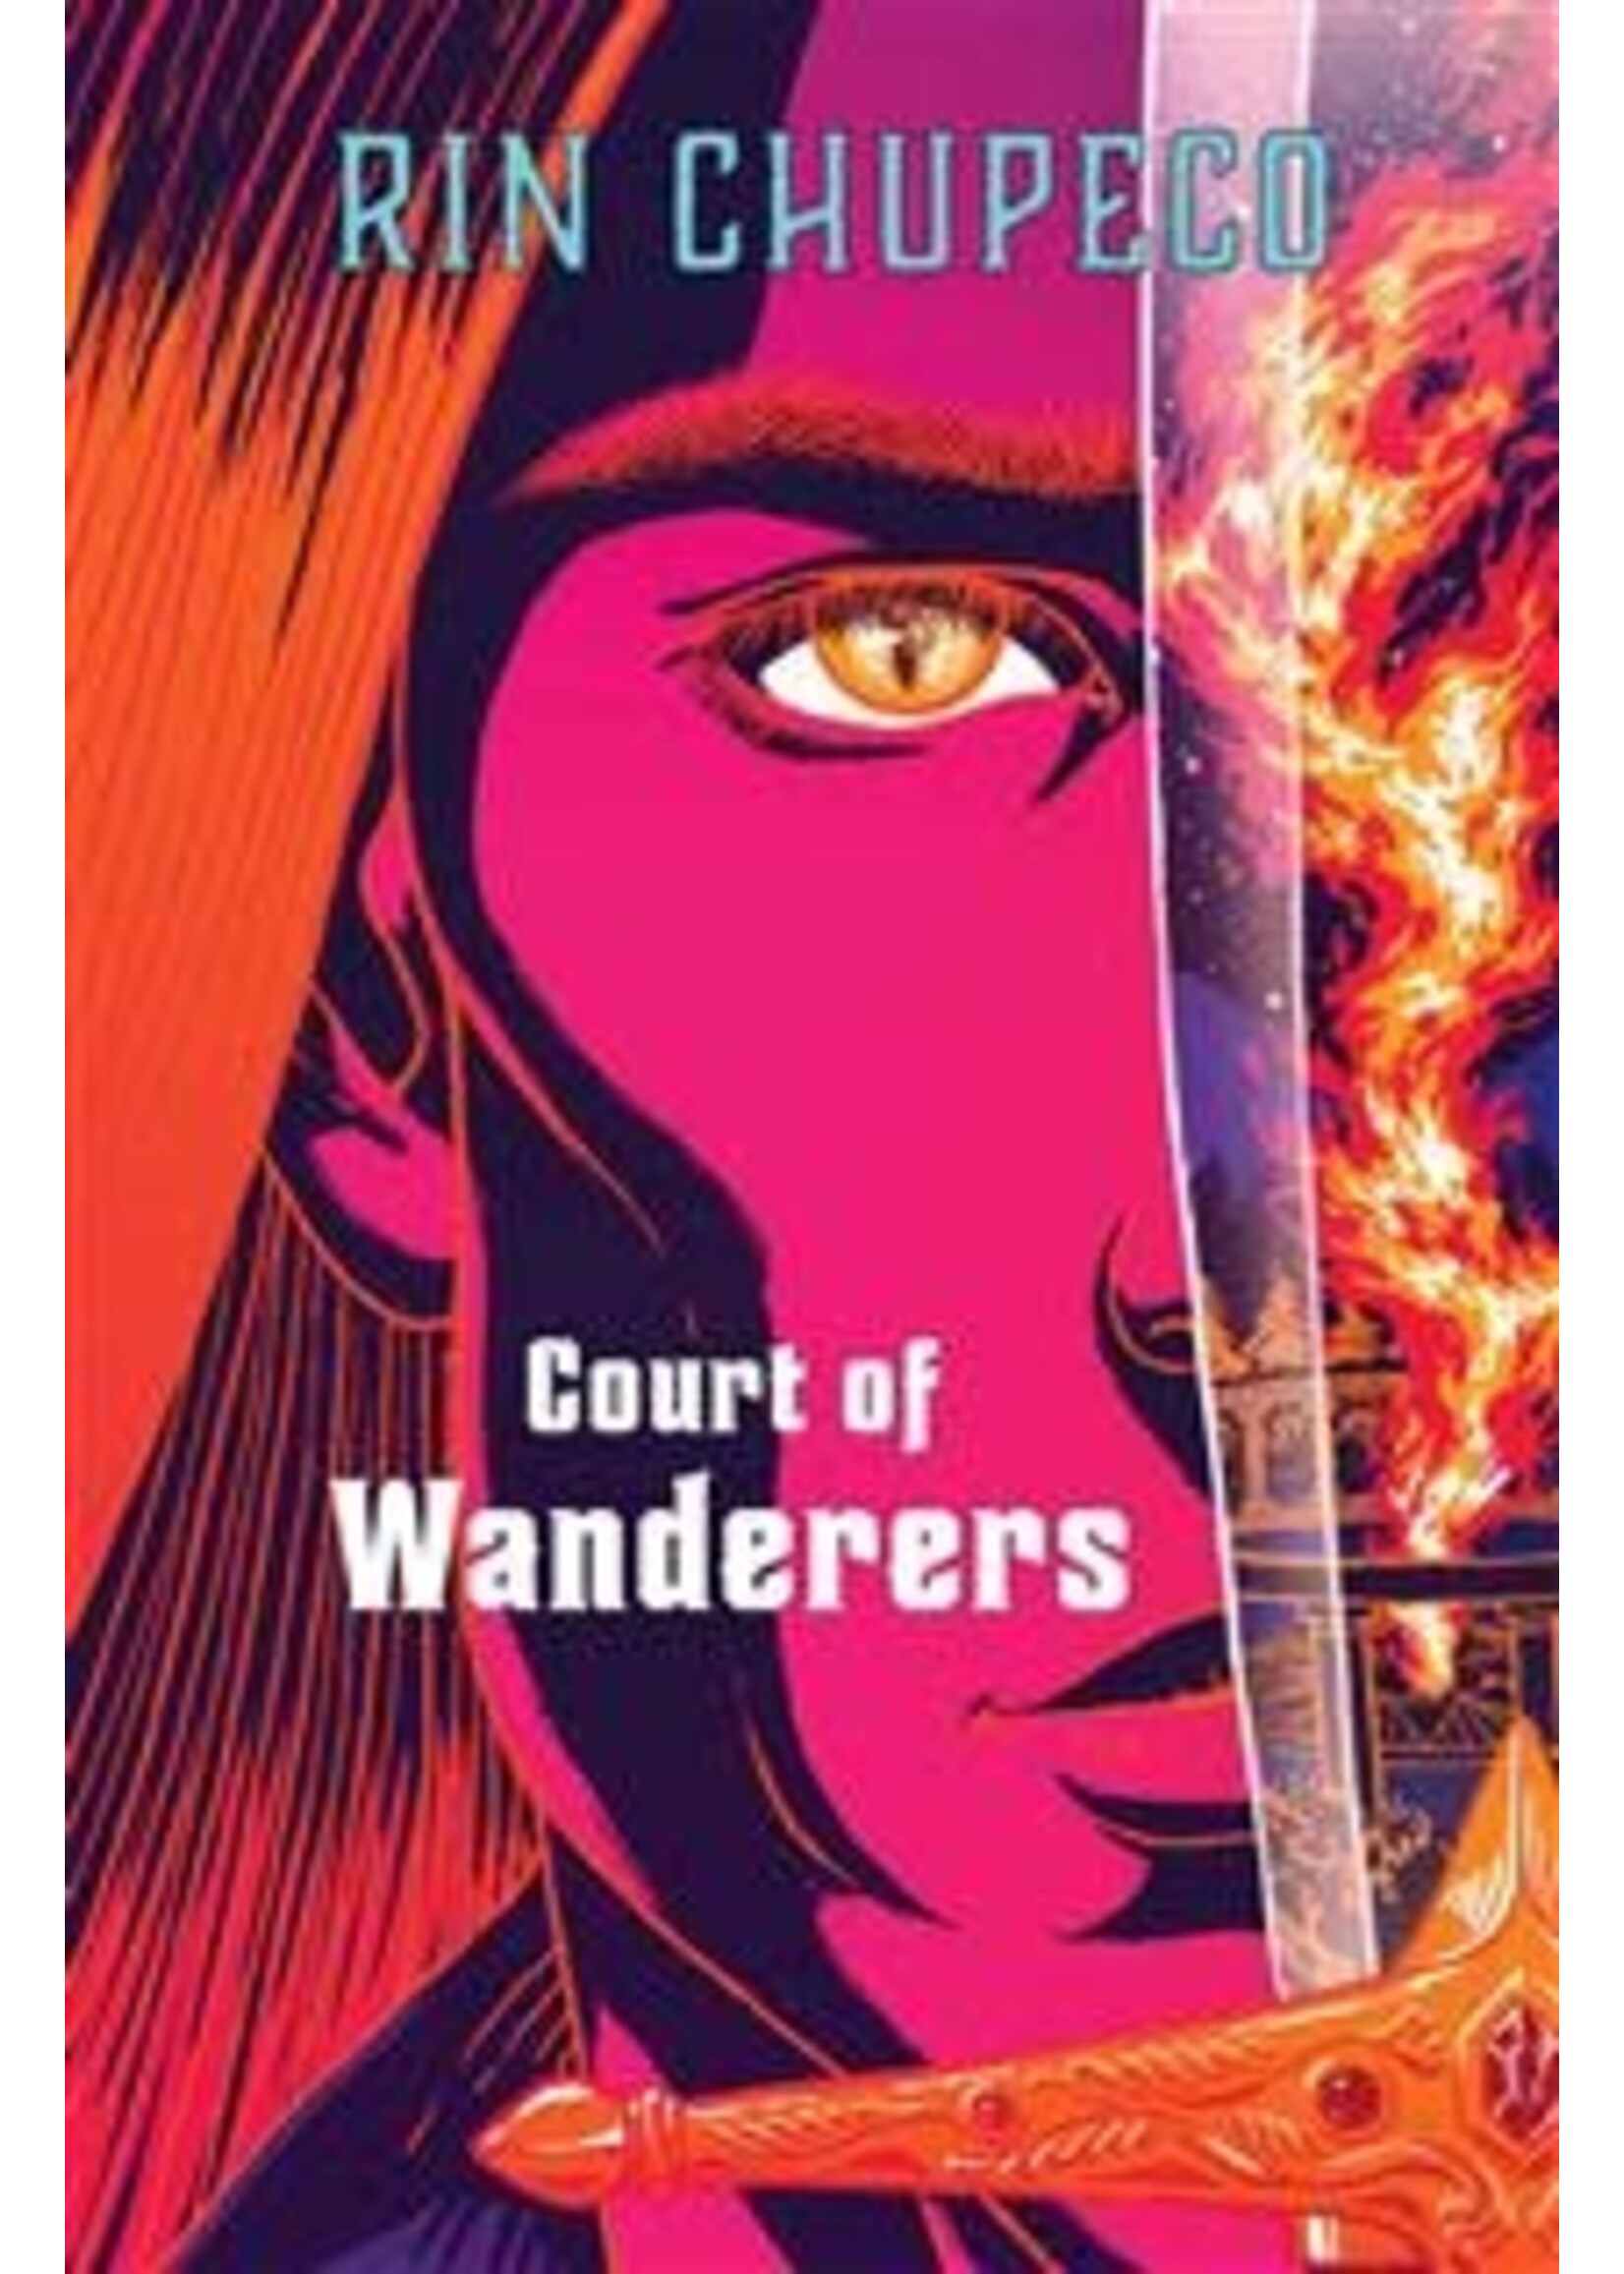 Court of Wanderers (Silver Under Nightfall #2) by Rin Chupeco